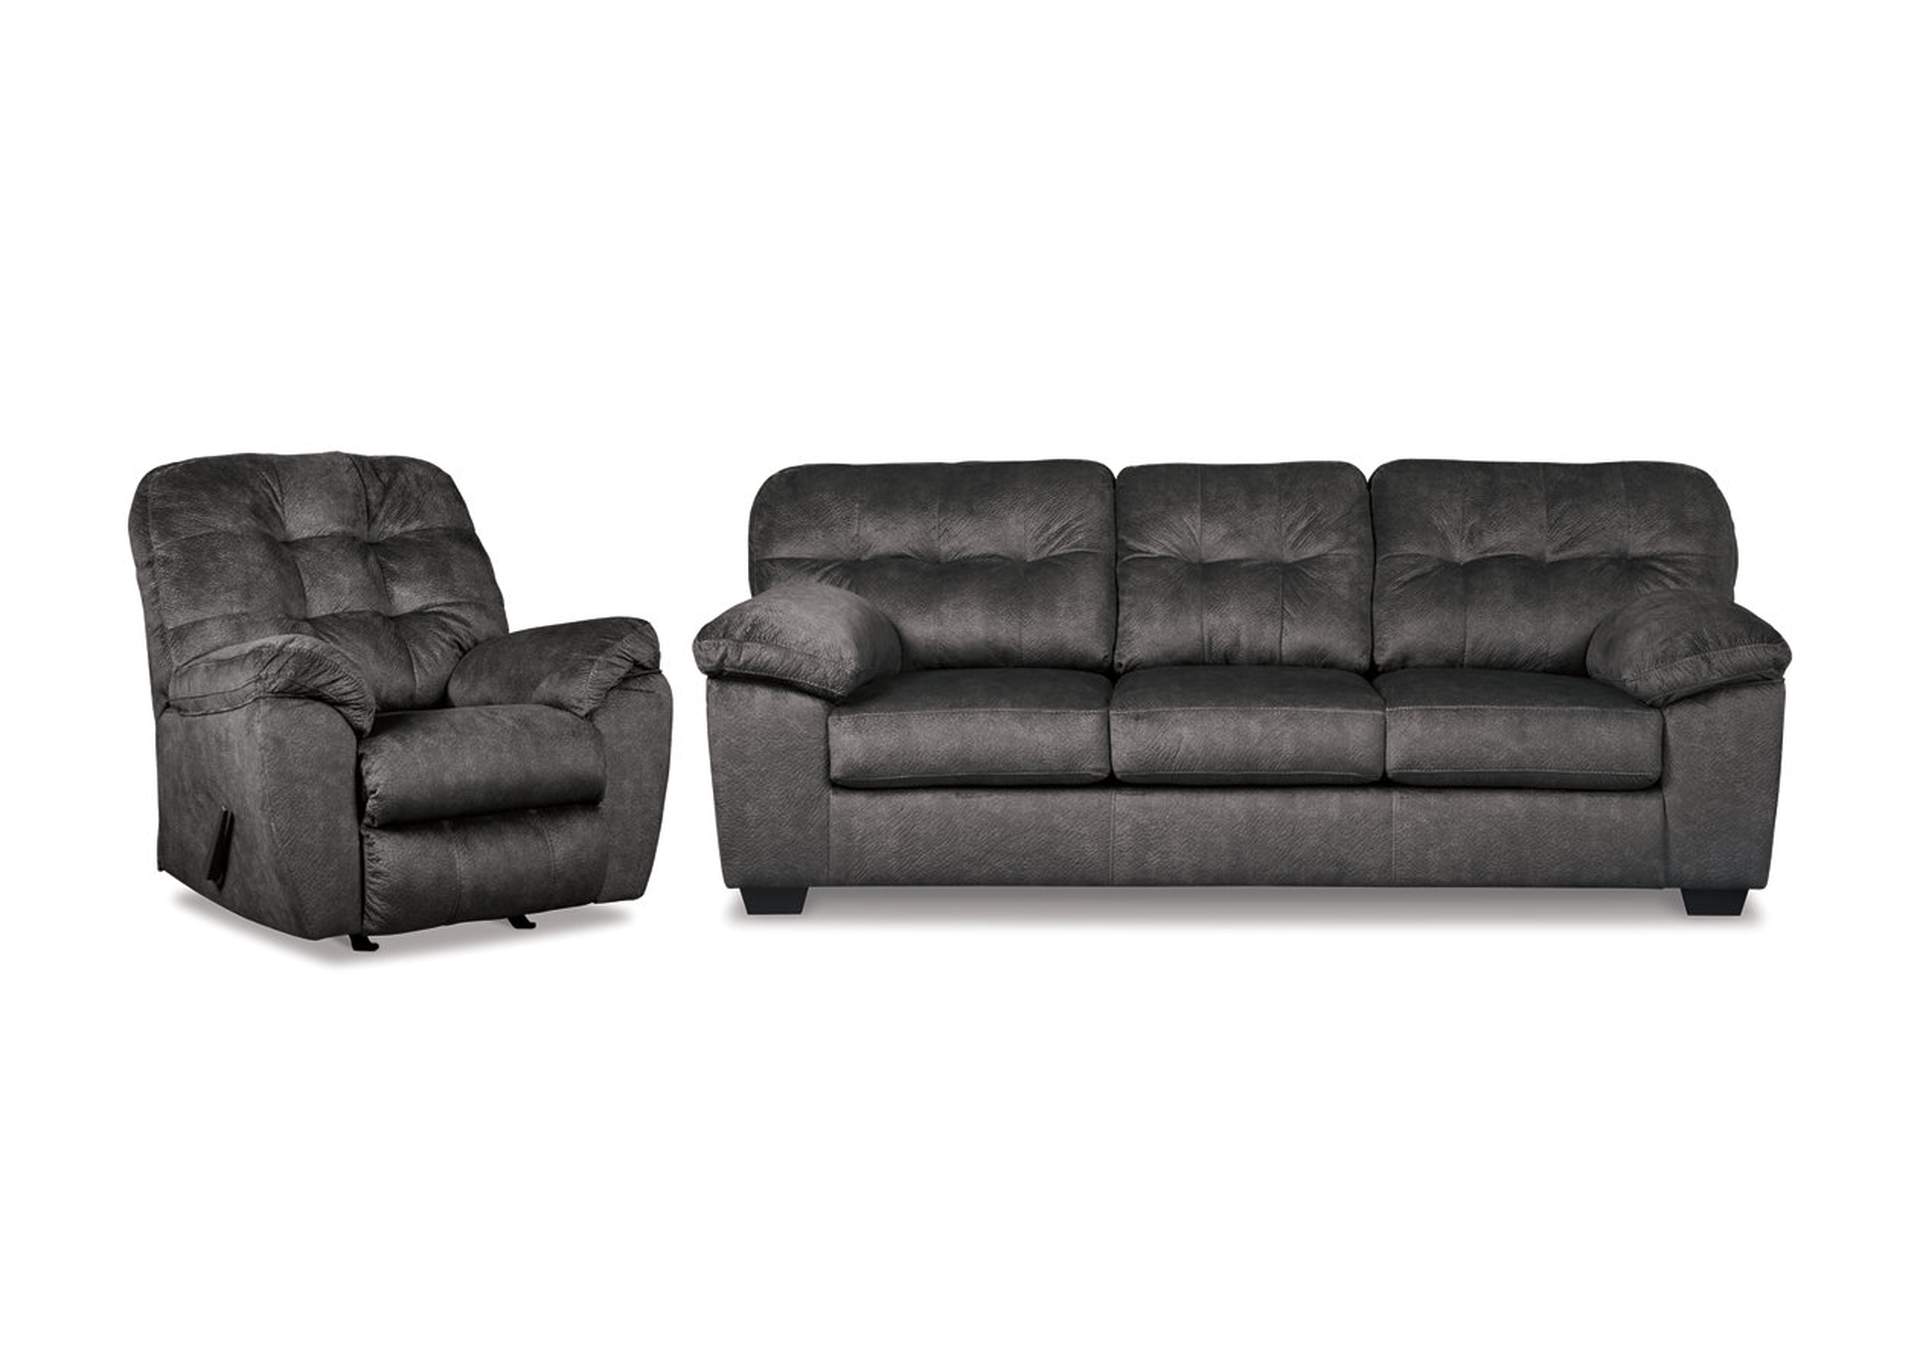 Accrington Sofa with Recliner,Signature Design By Ashley